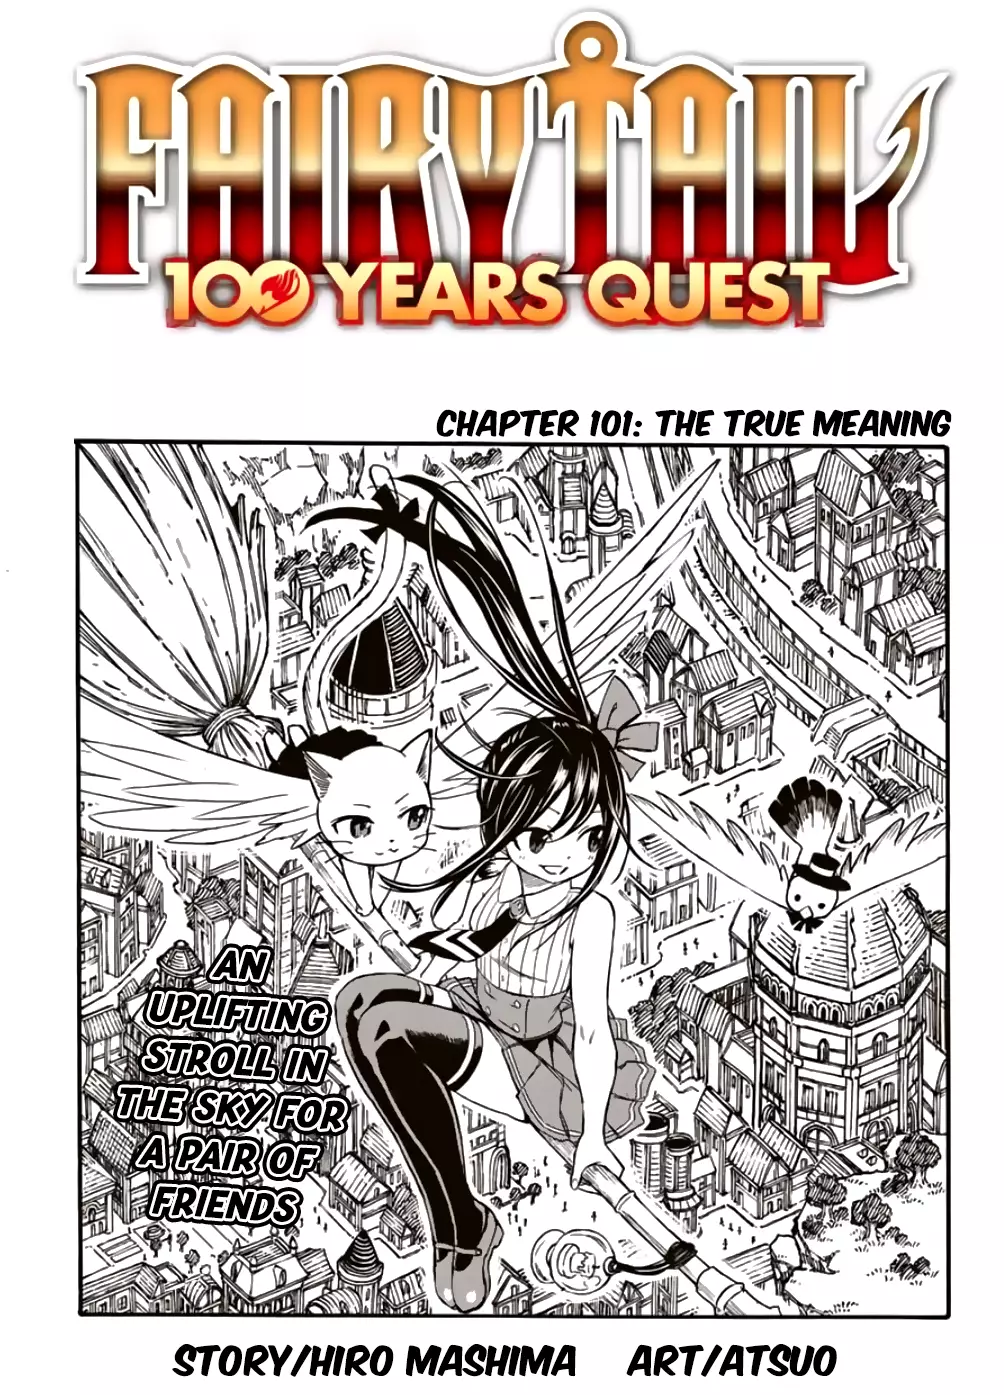 Fairy Tail: 100 Years Quest - 101 page 1-79962a67